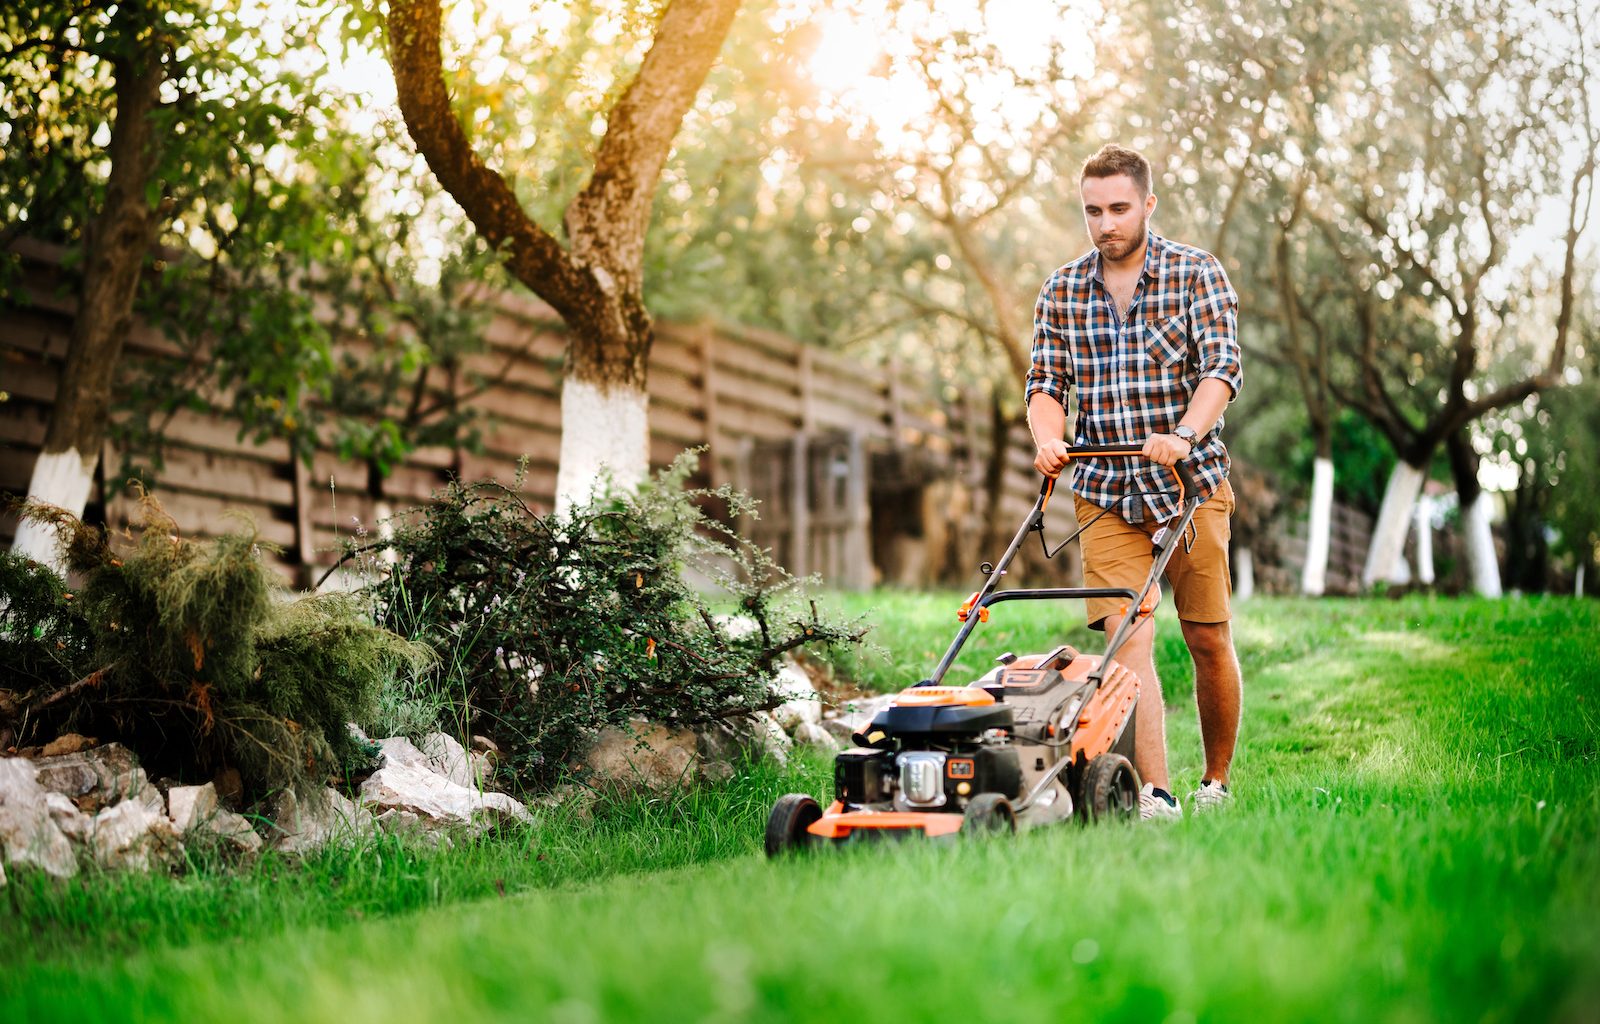 Is mowing the lawn a good workout?